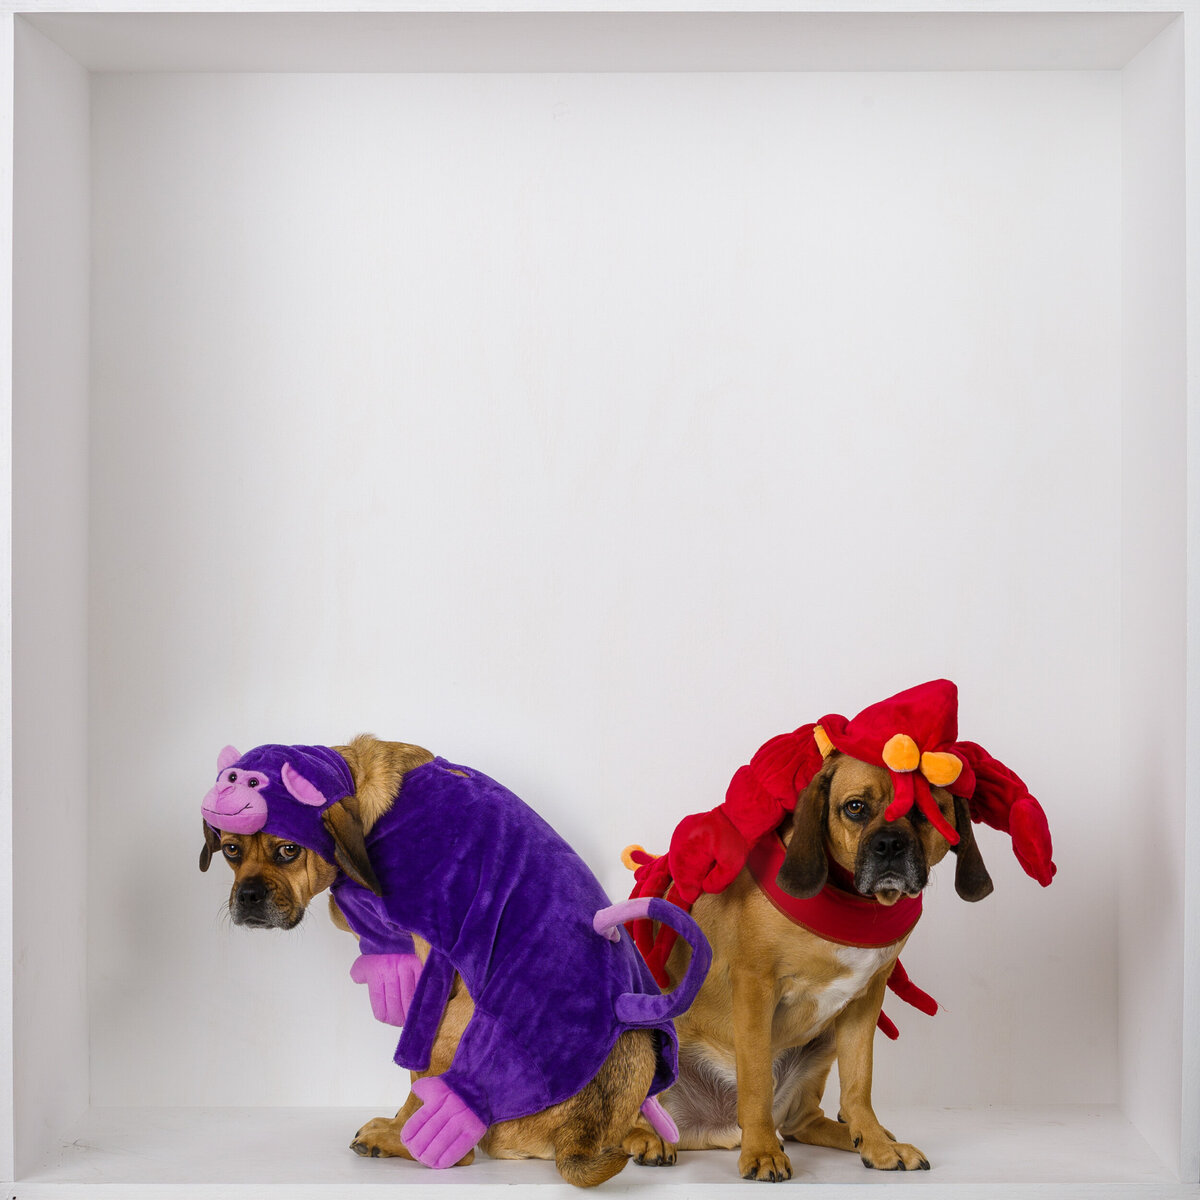 Two dogs in Halloween costumes in a white box